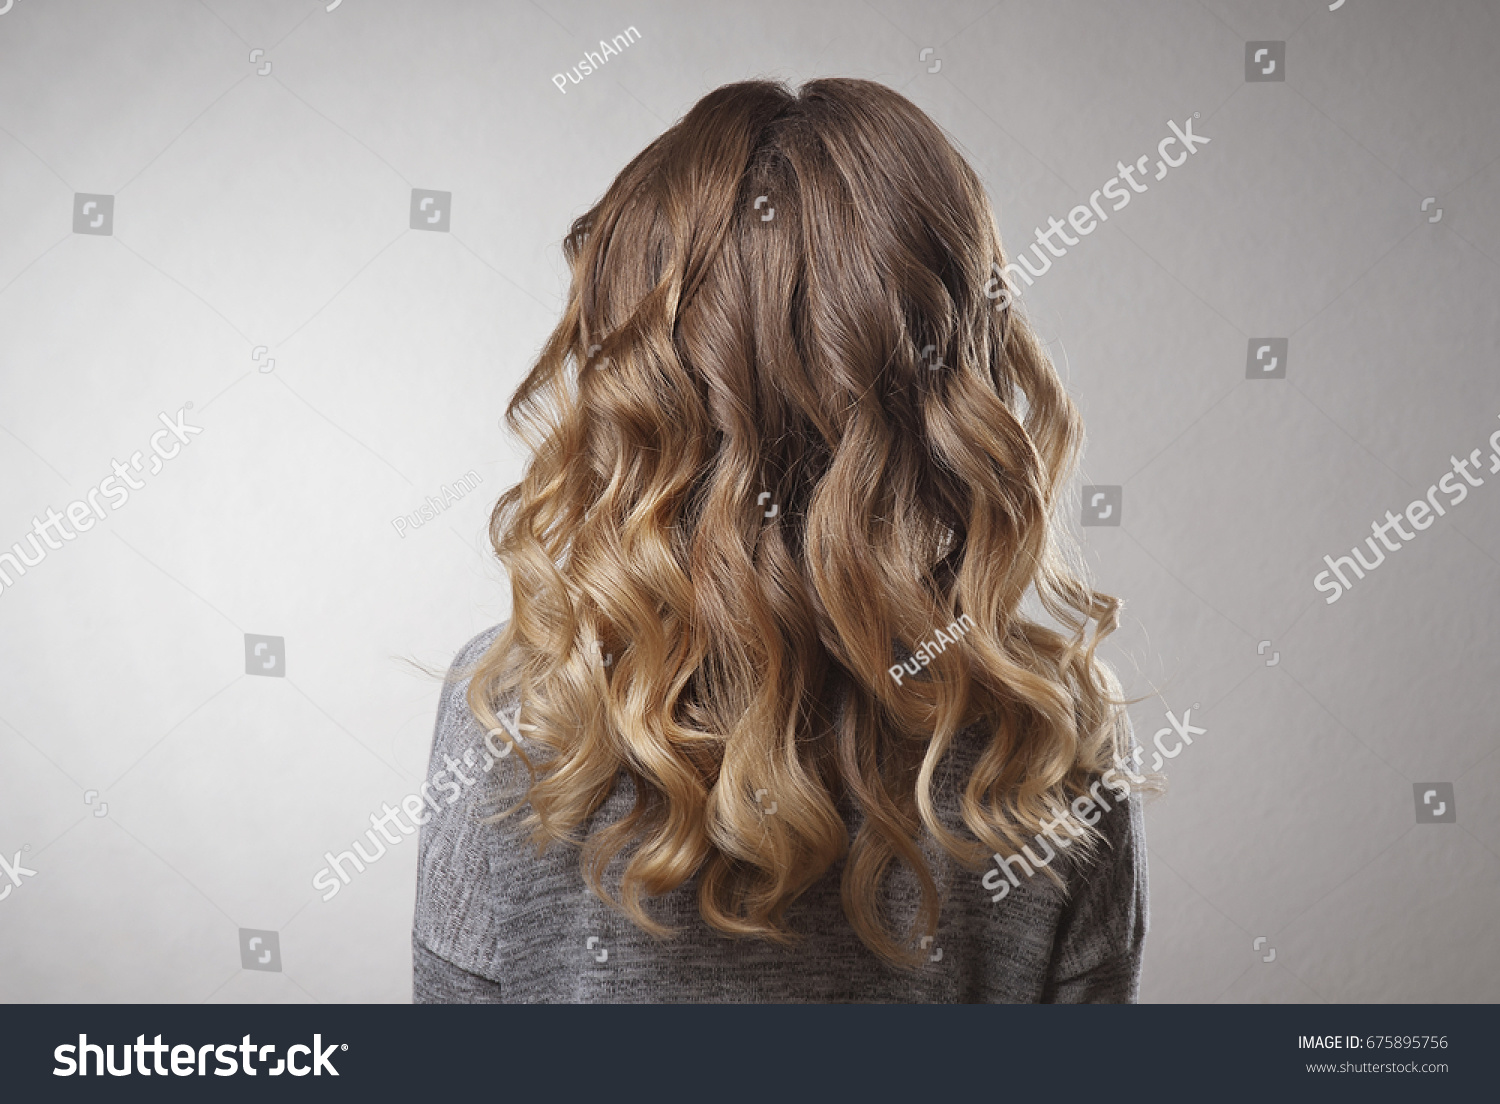 Demonstration of hairstyles long curls on the blonde woman on isolated background #675895756